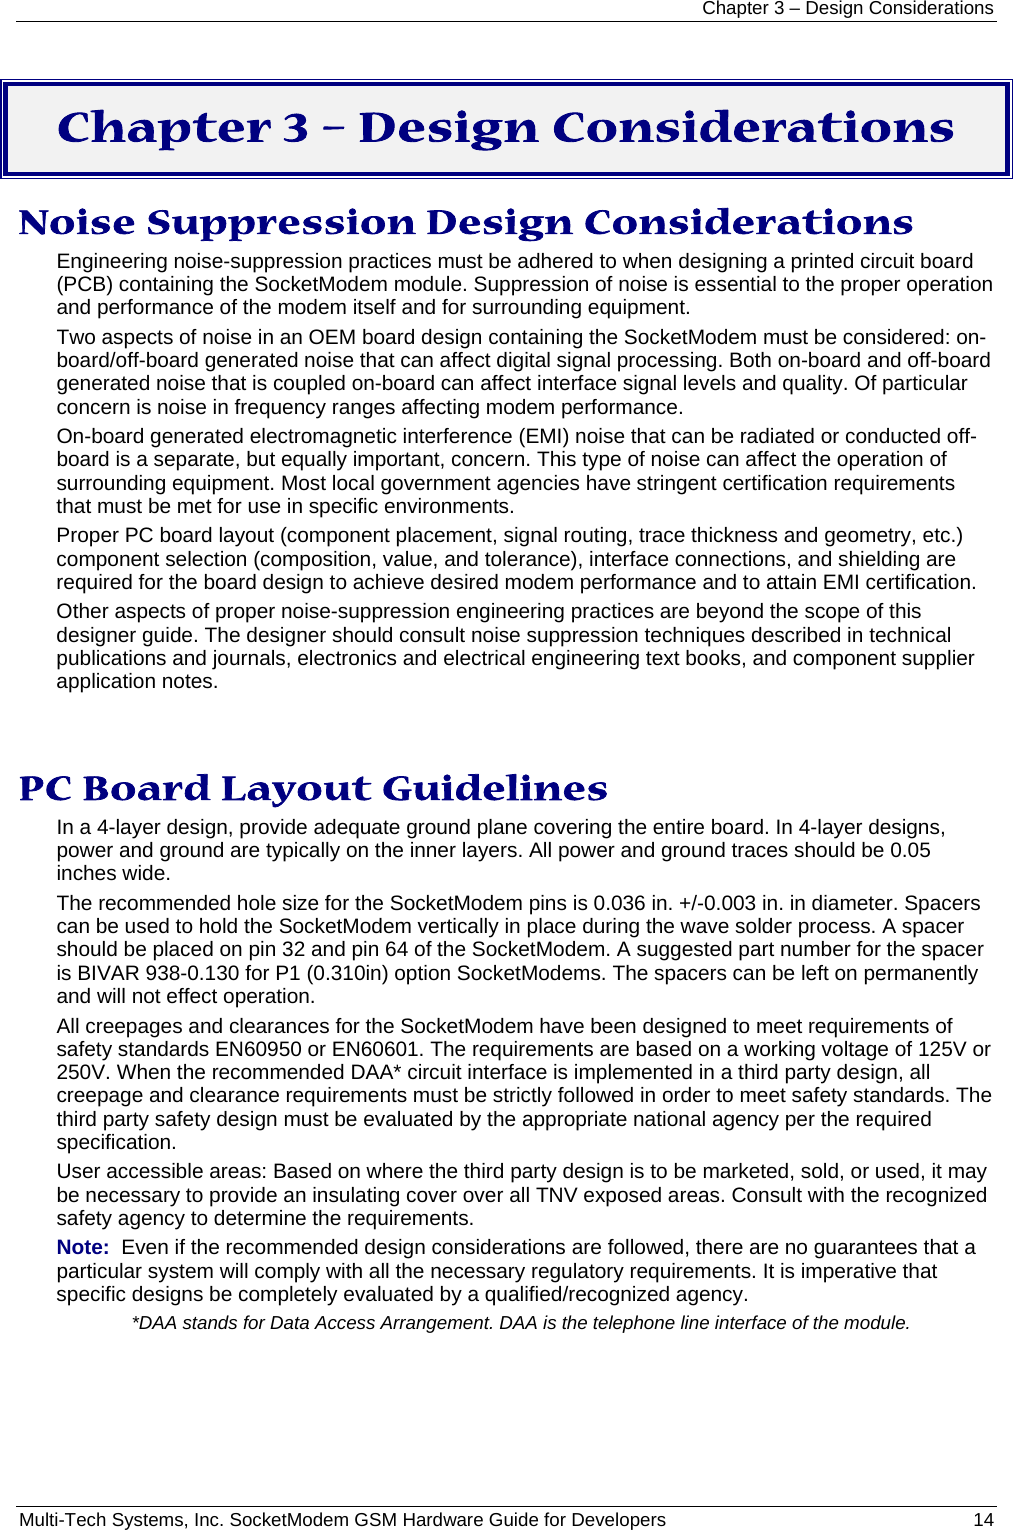 Chapter 3 – Design Considerations Multi-Tech Systems, Inc. SocketModem GSM Hardware Guide for Developers   14   Chapter 3 – Design Considerations Noise Suppression Design Considerations Engineering noise-suppression practices must be adhered to when designing a printed circuit board (PCB) containing the SocketModem module. Suppression of noise is essential to the proper operation and performance of the modem itself and for surrounding equipment. Two aspects of noise in an OEM board design containing the SocketModem must be considered: on-board/off-board generated noise that can affect digital signal processing. Both on-board and off-board generated noise that is coupled on-board can affect interface signal levels and quality. Of particular concern is noise in frequency ranges affecting modem performance. On-board generated electromagnetic interference (EMI) noise that can be radiated or conducted off-board is a separate, but equally important, concern. This type of noise can affect the operation of surrounding equipment. Most local government agencies have stringent certification requirements that must be met for use in specific environments. Proper PC board layout (component placement, signal routing, trace thickness and geometry, etc.) component selection (composition, value, and tolerance), interface connections, and shielding are required for the board design to achieve desired modem performance and to attain EMI certification. Other aspects of proper noise-suppression engineering practices are beyond the scope of this designer guide. The designer should consult noise suppression techniques described in technical publications and journals, electronics and electrical engineering text books, and component supplier application notes.  PC Board Layout Guidelines In a 4-layer design, provide adequate ground plane covering the entire board. In 4-layer designs, power and ground are typically on the inner layers. All power and ground traces should be 0.05 inches wide. The recommended hole size for the SocketModem pins is 0.036 in. +/-0.003 in. in diameter. Spacers can be used to hold the SocketModem vertically in place during the wave solder process. A spacer should be placed on pin 32 and pin 64 of the SocketModem. A suggested part number for the spacer is BIVAR 938-0.130 for P1 (0.310in) option SocketModems. The spacers can be left on permanently and will not effect operation. All creepages and clearances for the SocketModem have been designed to meet requirements of safety standards EN60950 or EN60601. The requirements are based on a working voltage of 125V or 250V. When the recommended DAA* circuit interface is implemented in a third party design, all creepage and clearance requirements must be strictly followed in order to meet safety standards. The third party safety design must be evaluated by the appropriate national agency per the required specification. User accessible areas: Based on where the third party design is to be marketed, sold, or used, it may be necessary to provide an insulating cover over all TNV exposed areas. Consult with the recognized safety agency to determine the requirements. Note:  Even if the recommended design considerations are followed, there are no guarantees that a particular system will comply with all the necessary regulatory requirements. It is imperative that specific designs be completely evaluated by a qualified/recognized agency. *DAA stands for Data Access Arrangement. DAA is the telephone line interface of the module.  